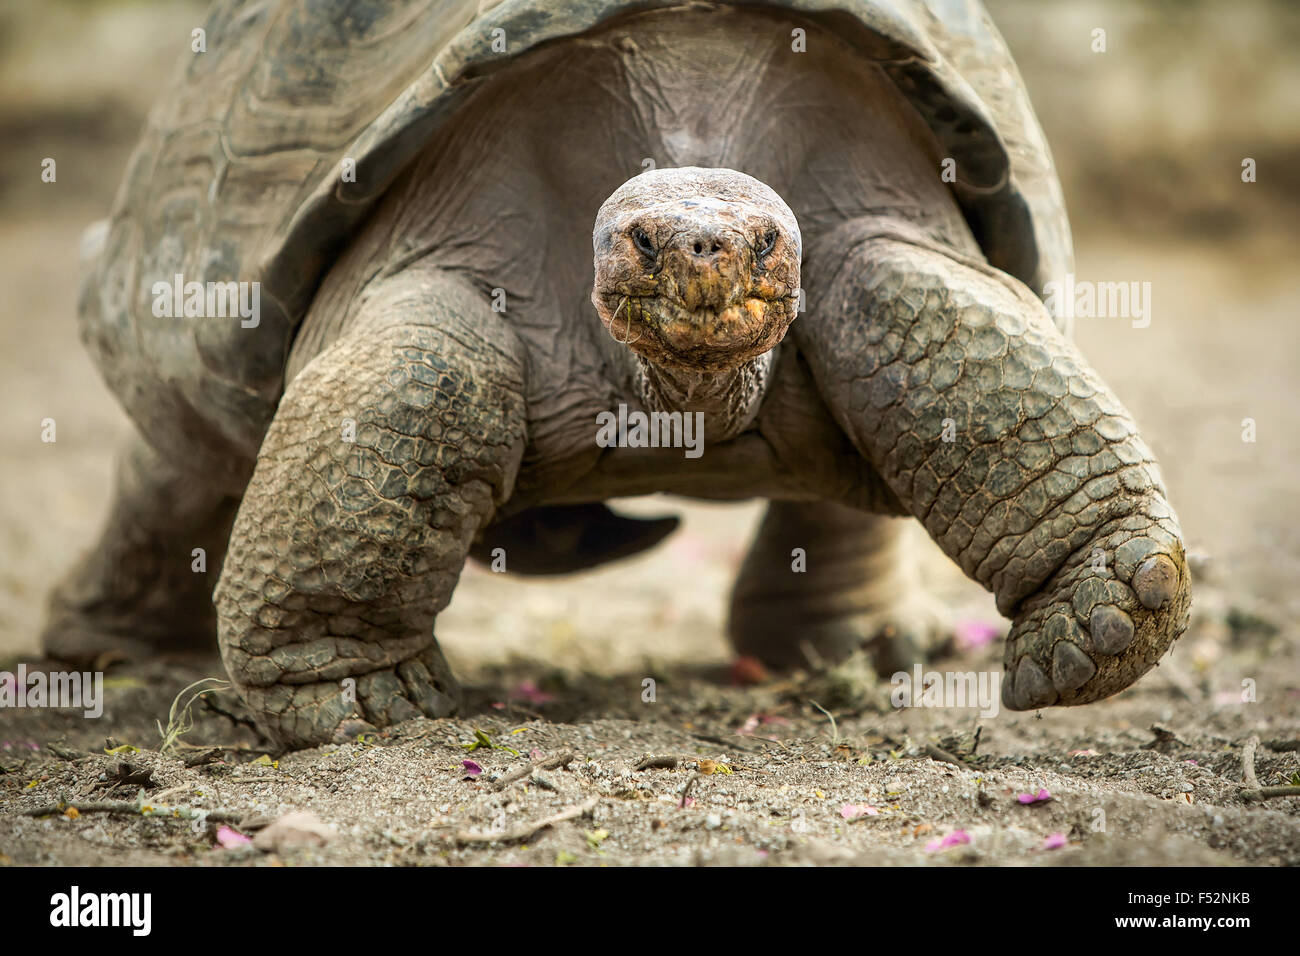 Galapagos Giant Tortoise Is The Largest Living Species Of Tortoise Reaching Weights Of Over 400 Kilograms And Lengths Of 1 8 Meters It Is Among The Lo Stock Photo